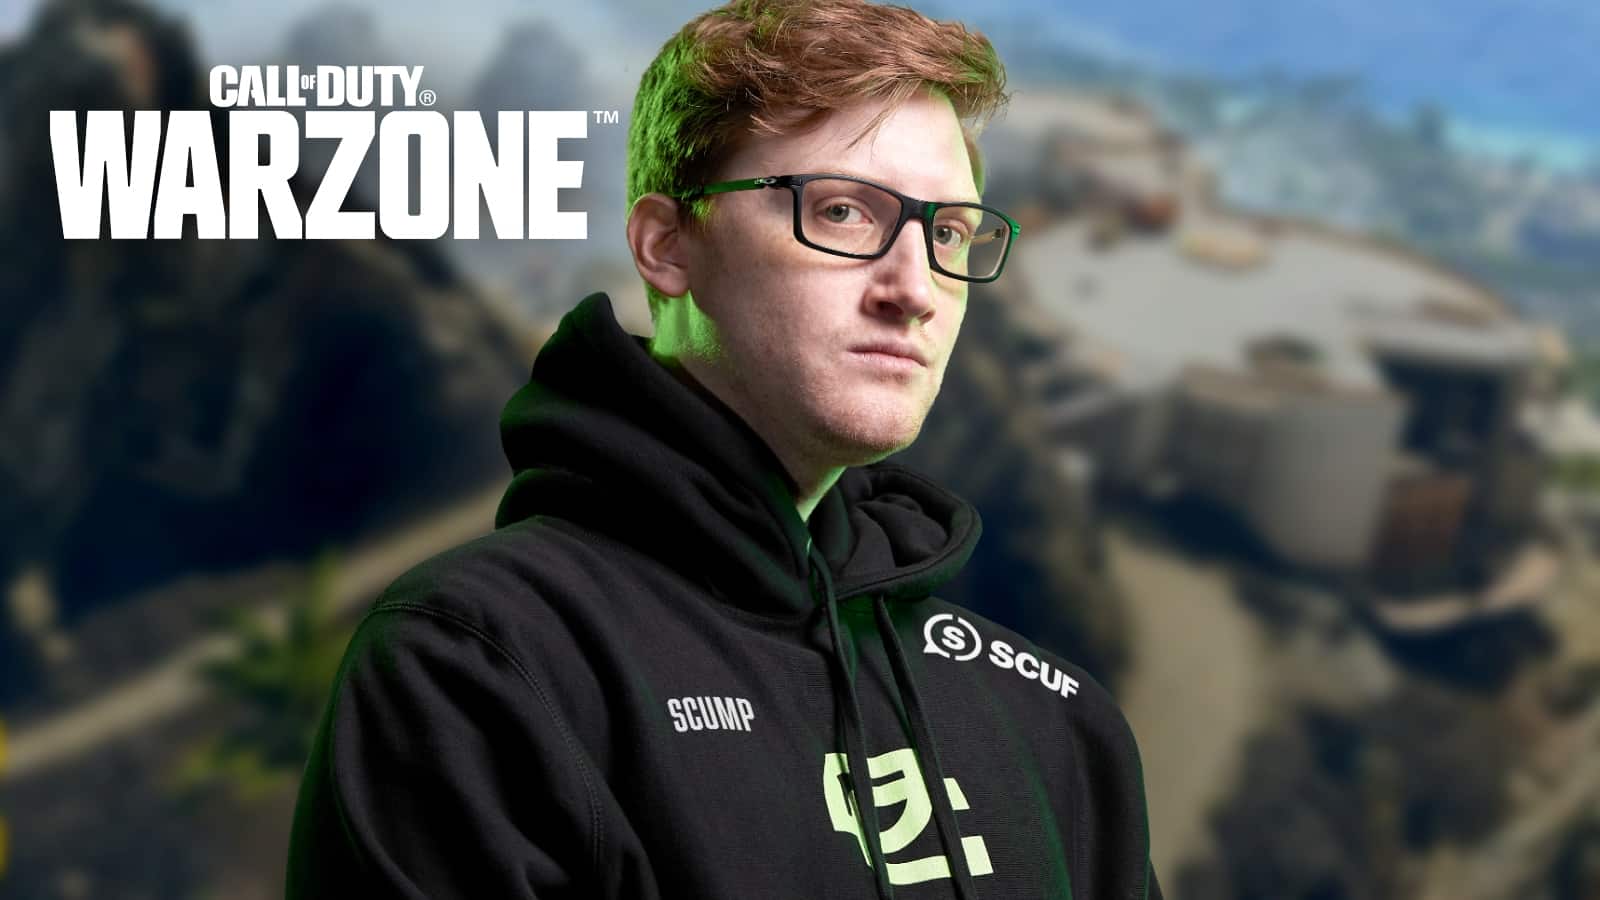 Scump on blurred Caldera background with Warzone logo in top right corner